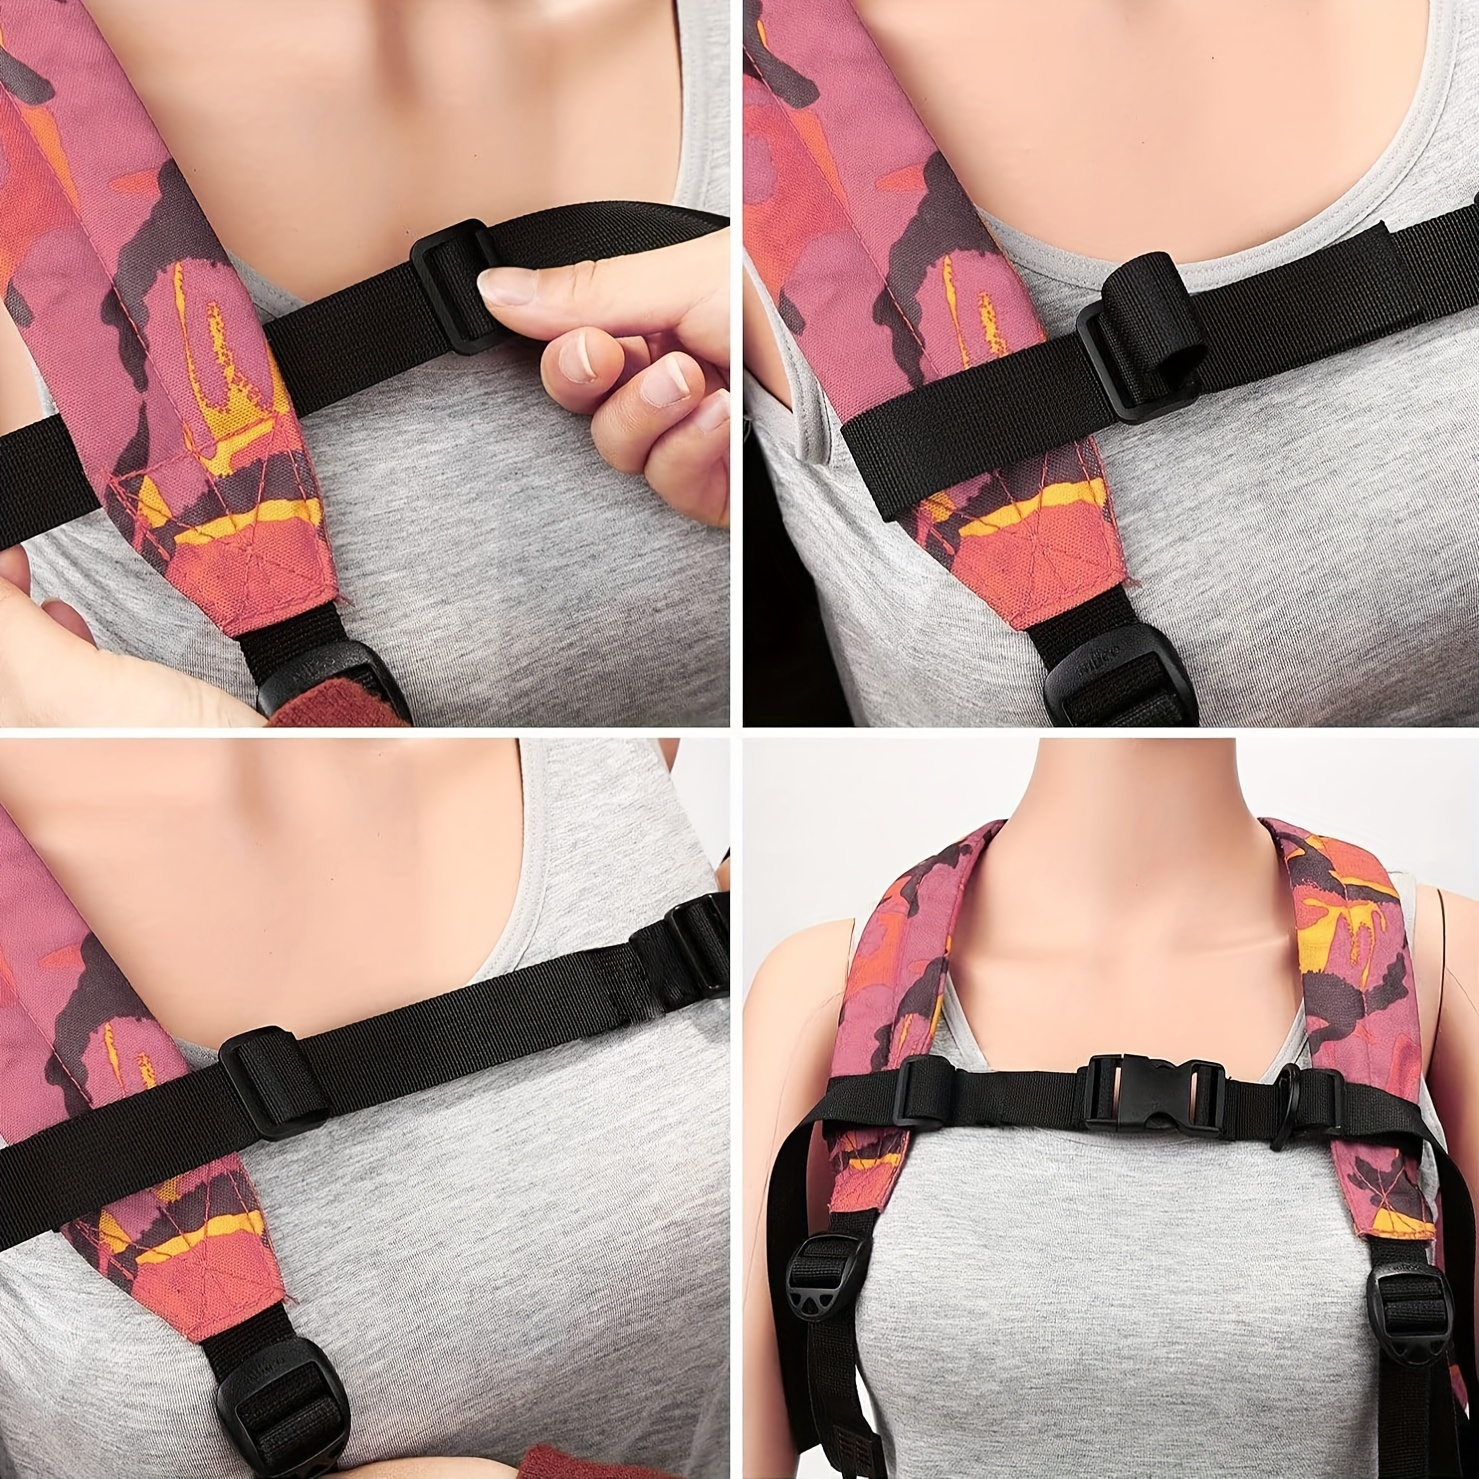 Backpack Chest Strap